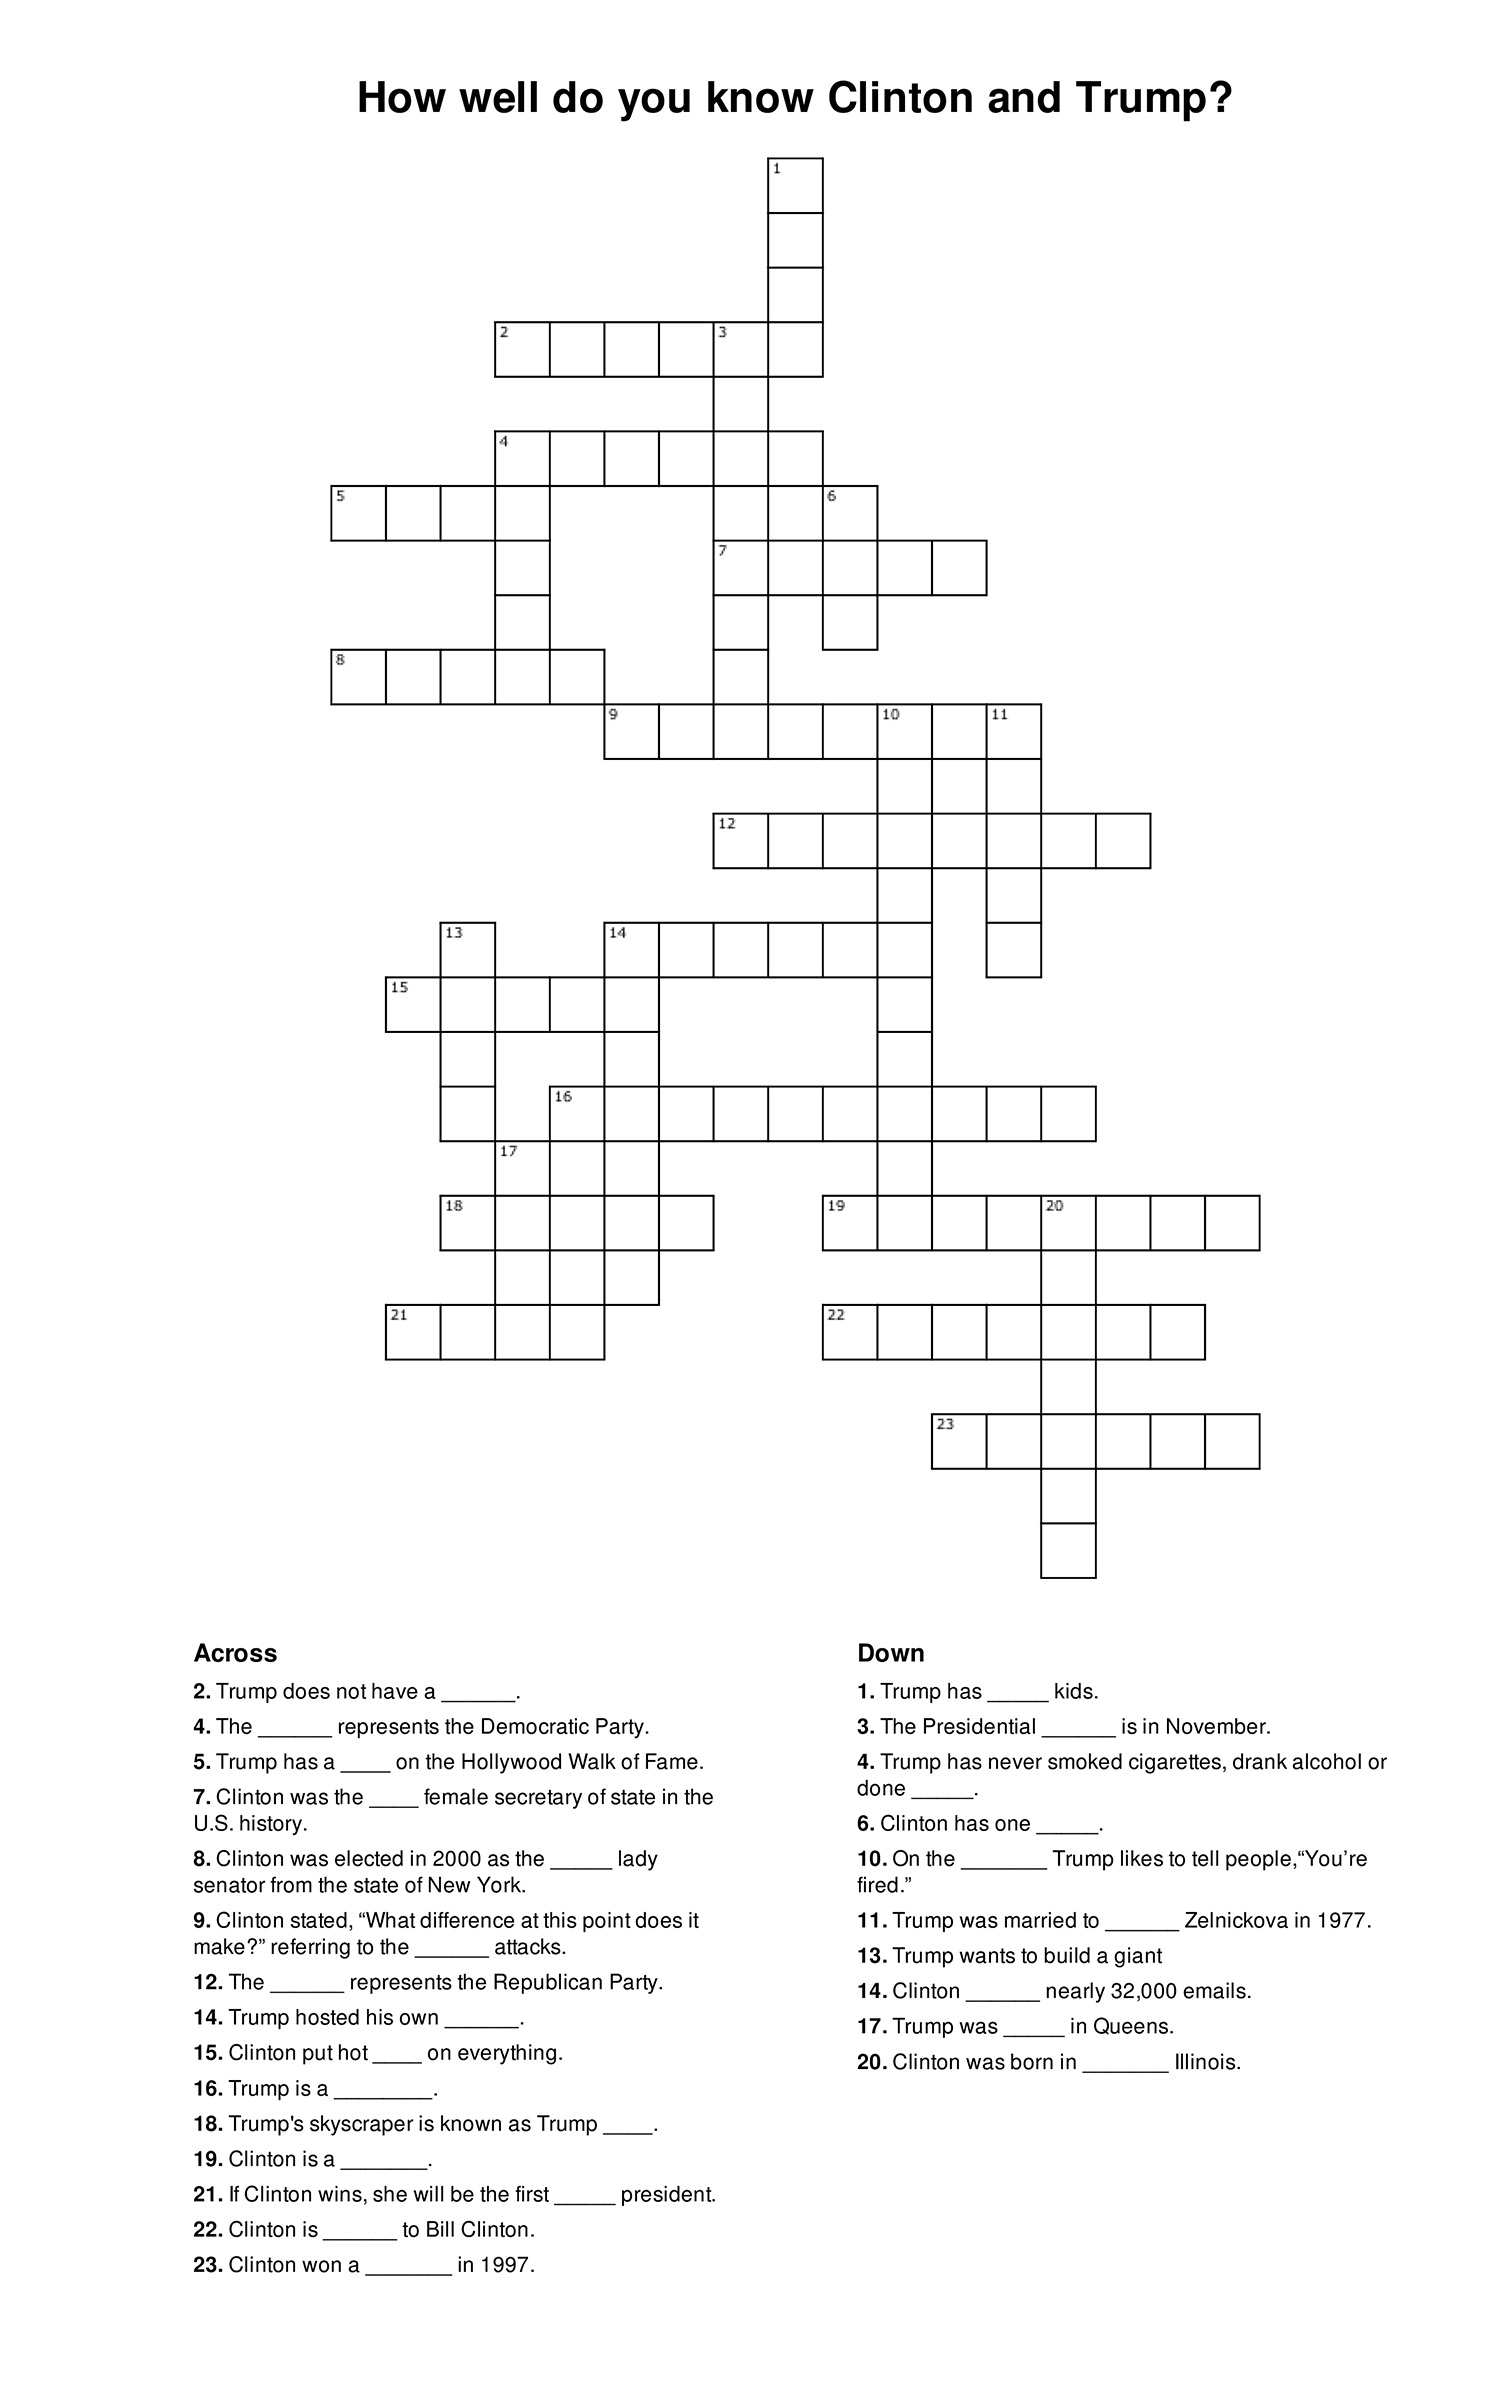 CROSSWORD PUZZLE: How well do you know Clinton and Trump? UHCL The Signal